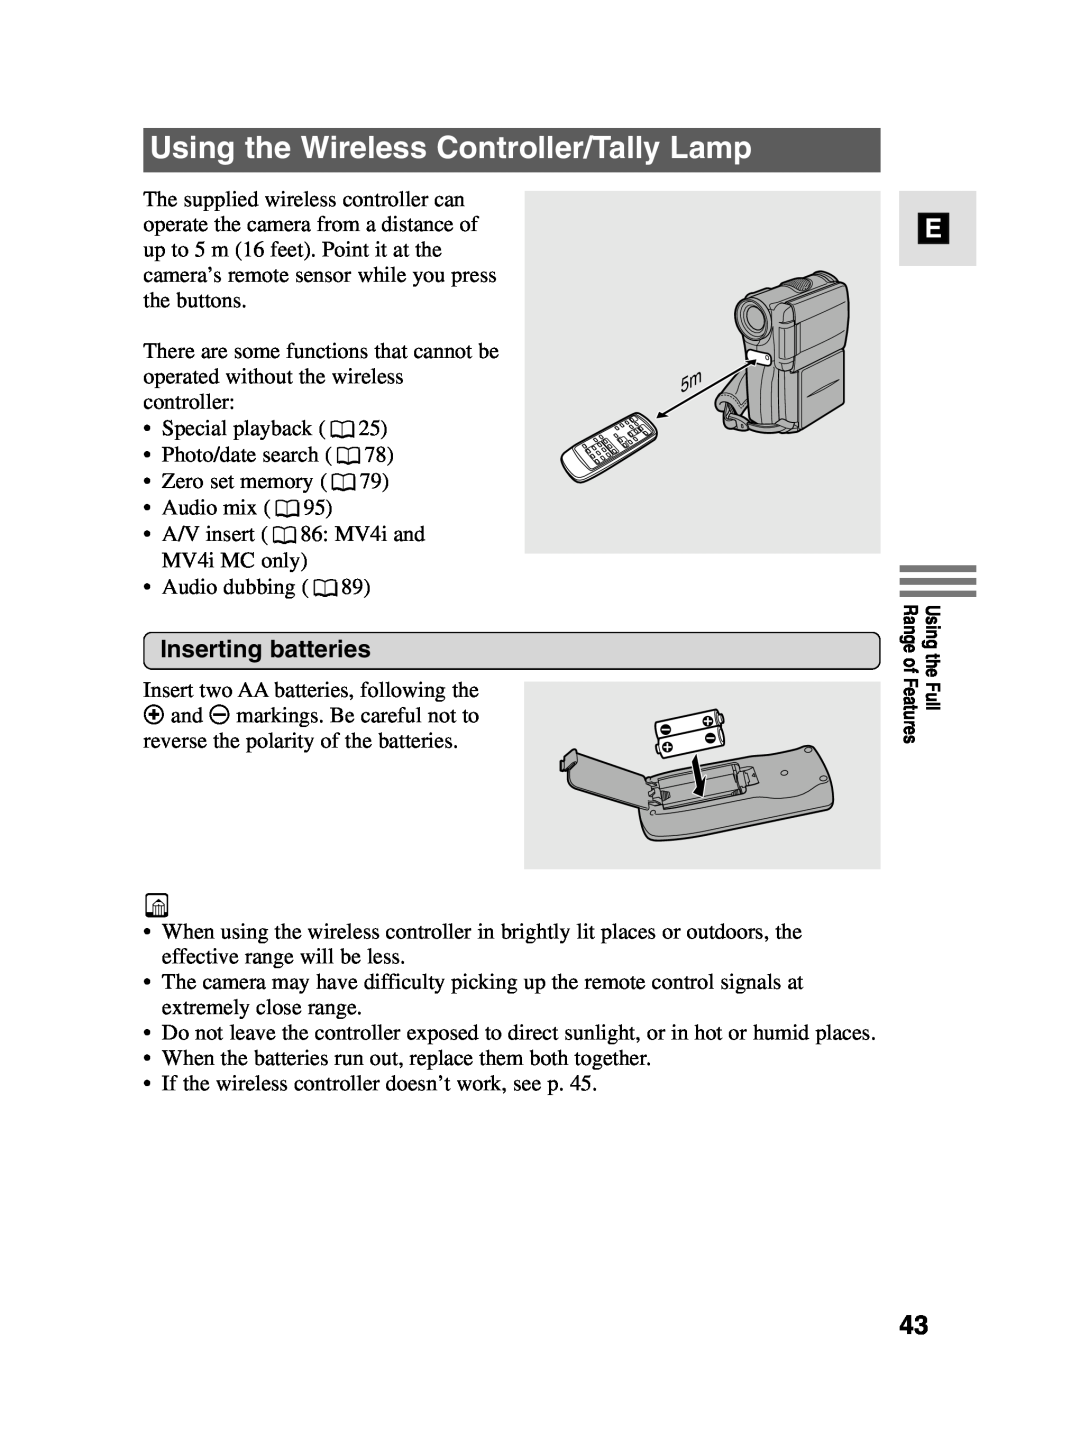 Canon MV4i MC instruction manual Using the Wireless Controller/Tally Lamp, Inserting batteries 